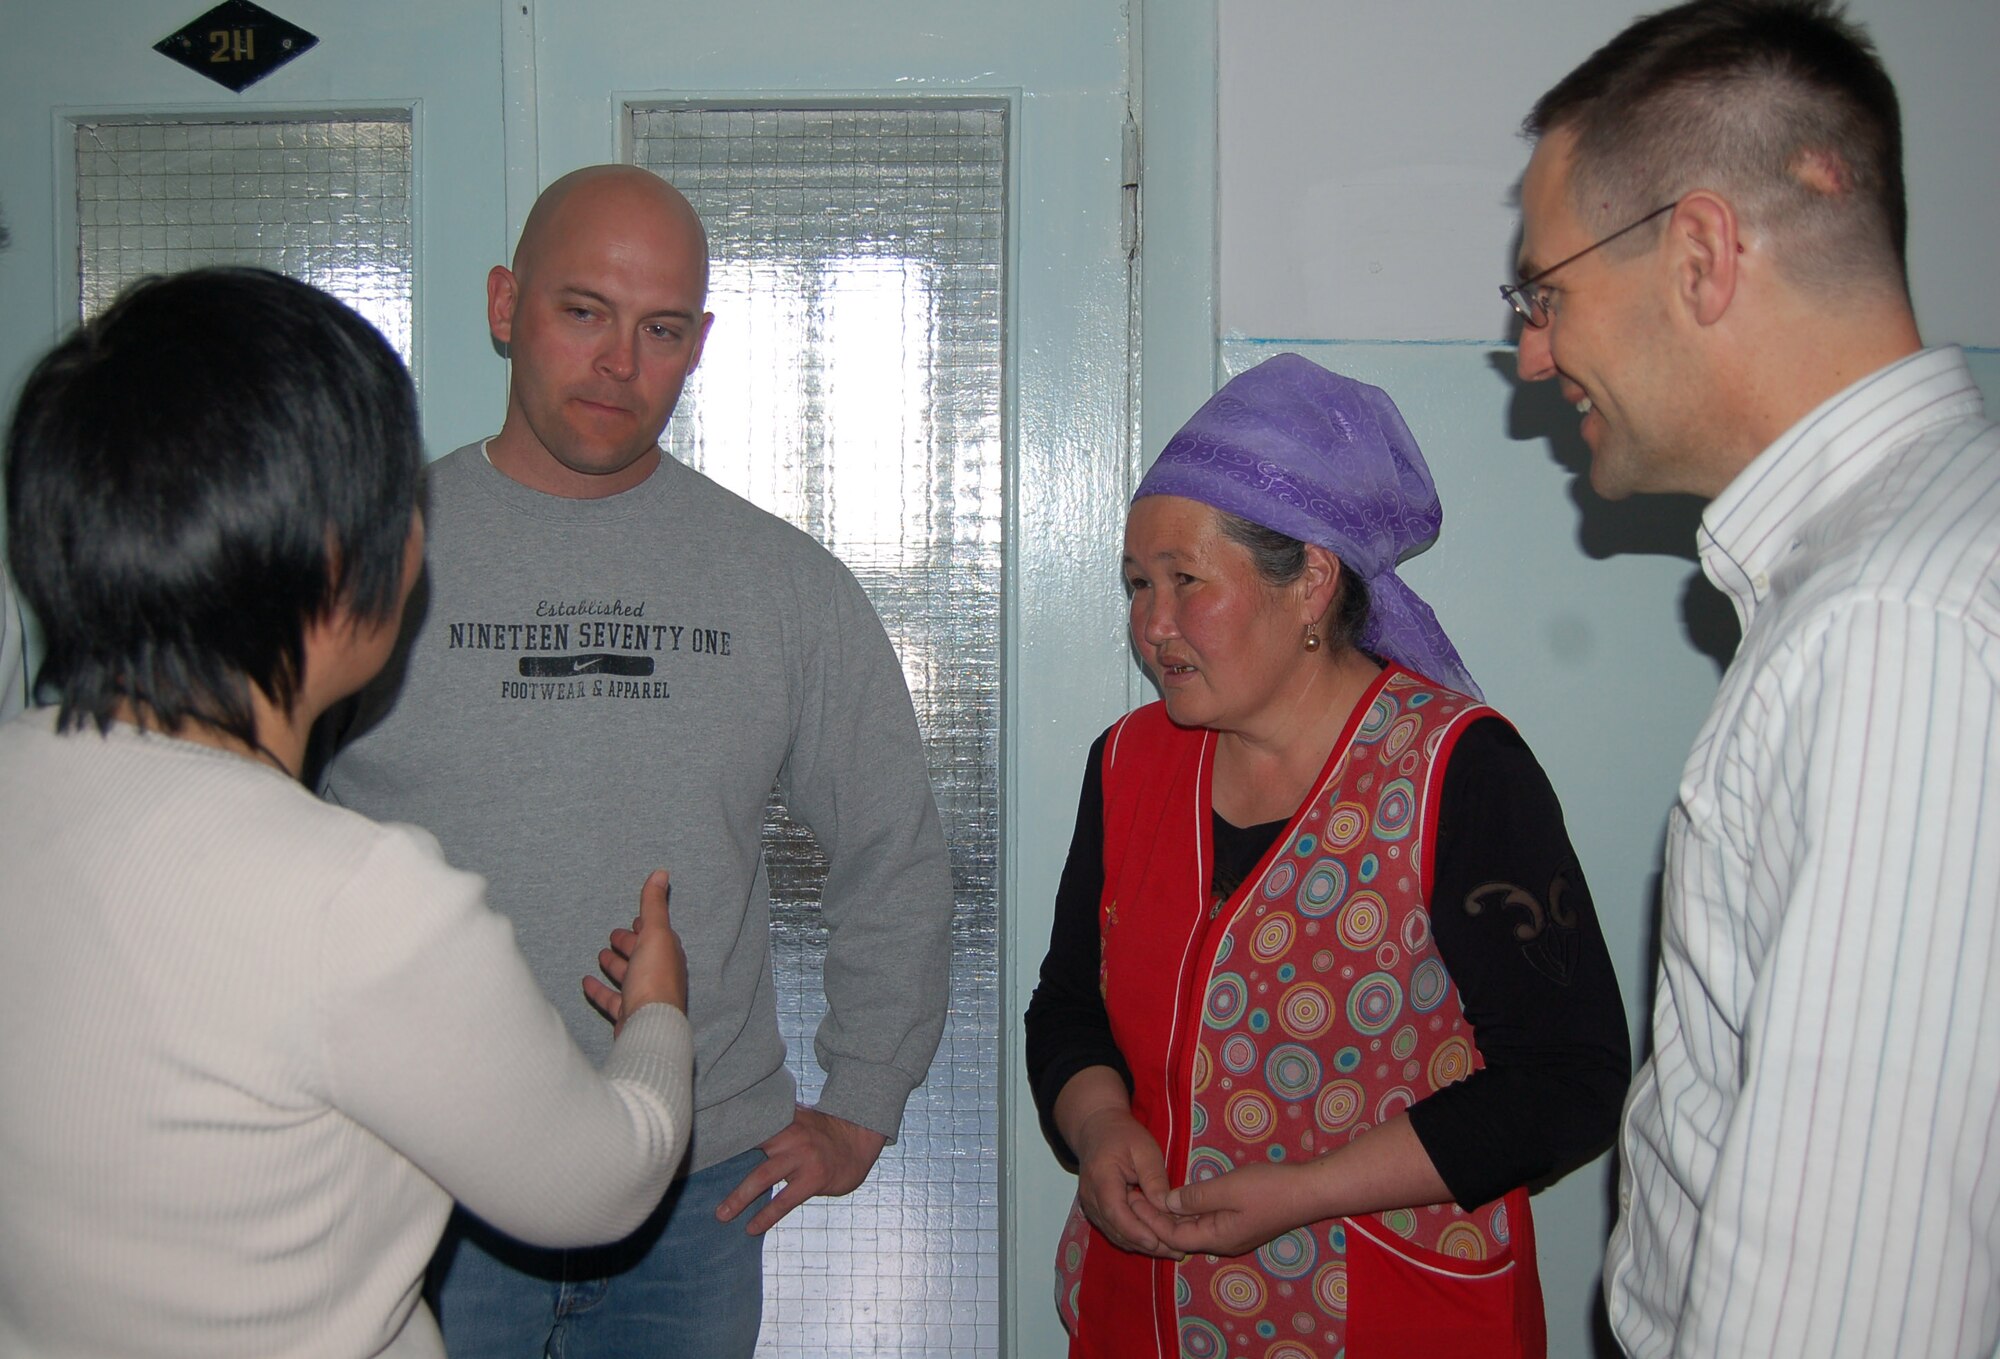 The 376th Aircraft Maintenance Squadron KC-135 Section Chief, Master Sgt. Scott Kaulig talks with Ms. Sakin Tumenbaeva, the mother of the 100th heart surgery patient, Alymbekov Amanbek, through Aigul Karymshakova, 376th Air Expeditionary Wing interpreter, Saturday in the Children's Heart Ward. Airmen from Manas Air Base Outreach Society visited the Children's Heart Ward to celebrate the 100th heart surgery and meet the staff and patients.  (Air Force photo by Tech. Sgt. Jerome Baysmore) 